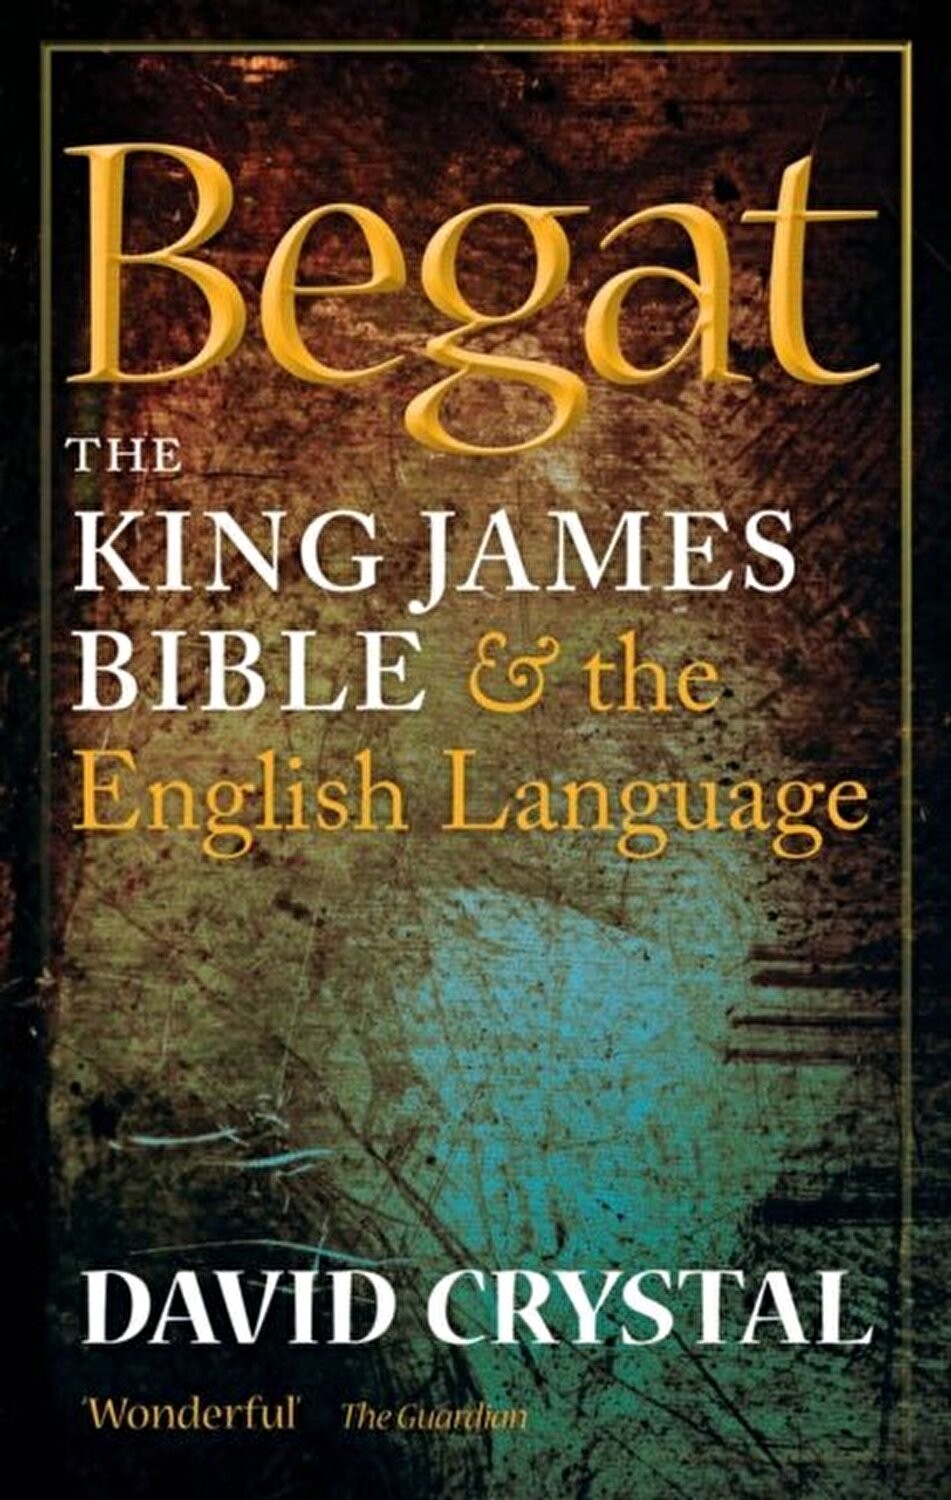 Begat: The King James Bible and the English Language